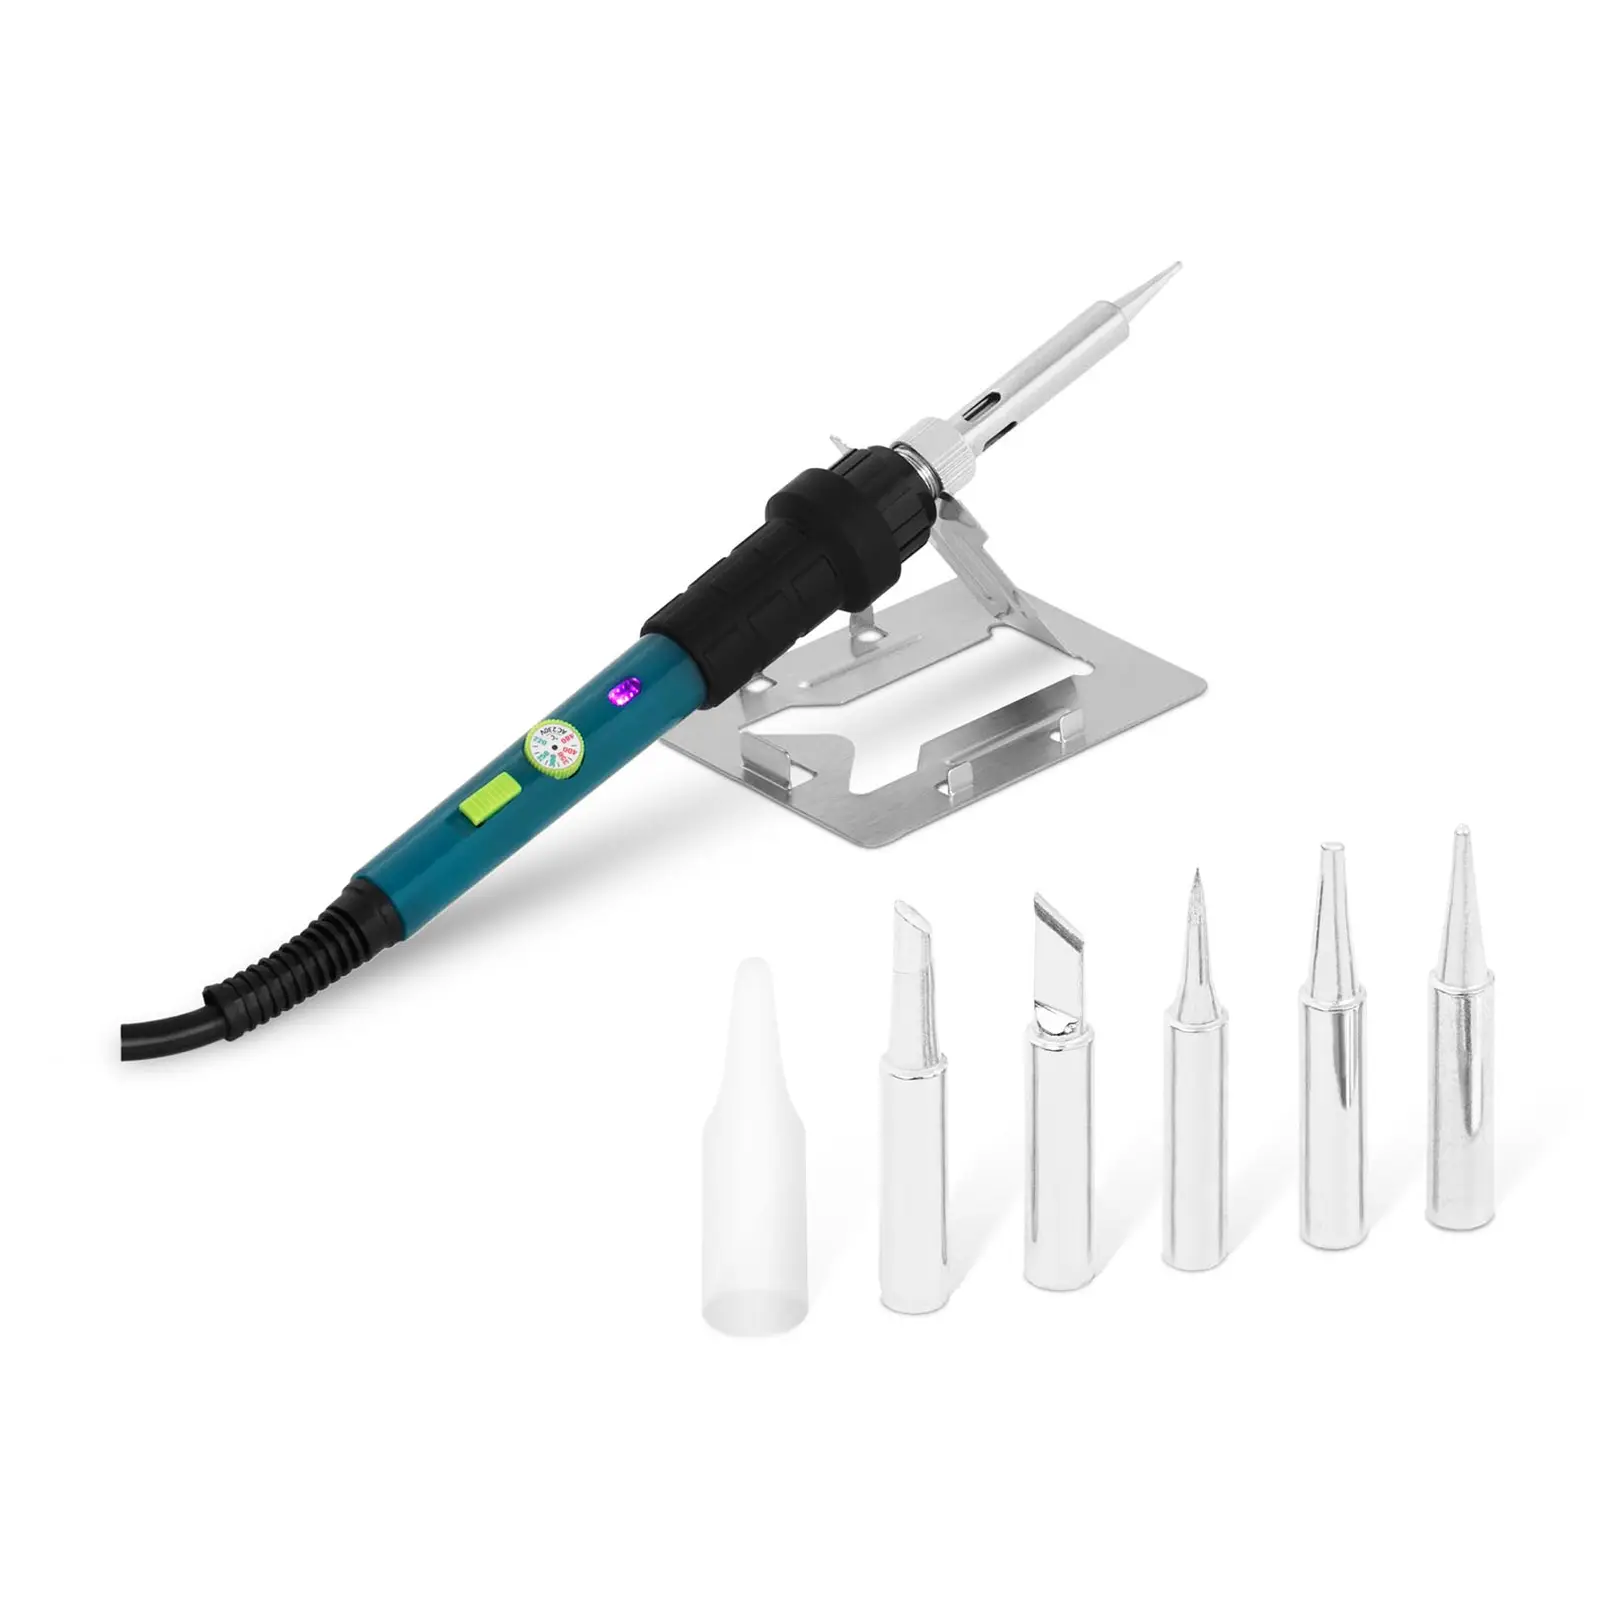 Soldering Iron with Stand